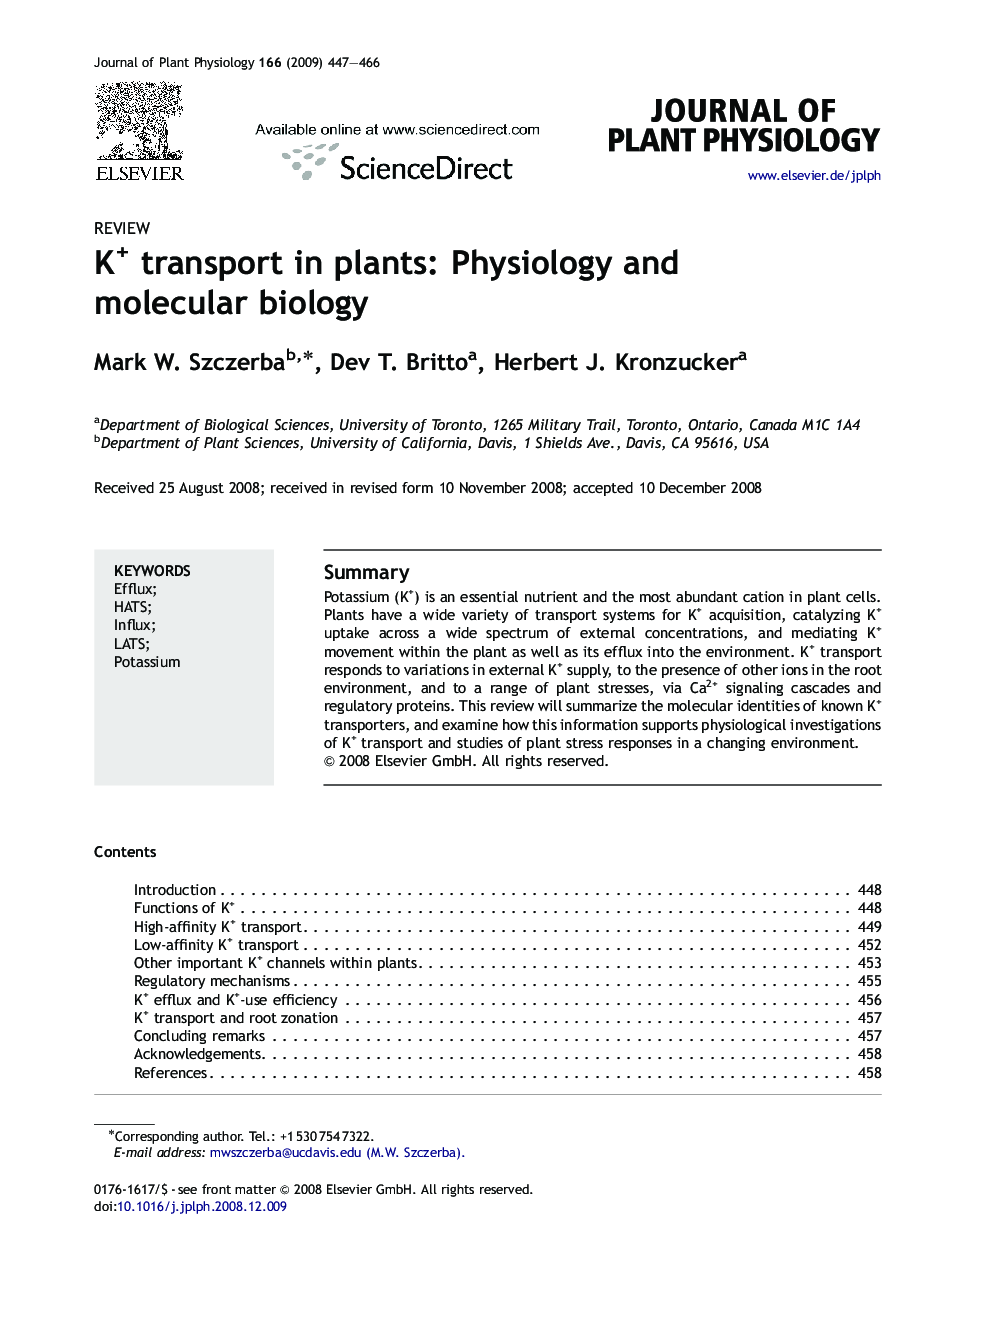 K+ transport in plants: Physiology and molecular biology